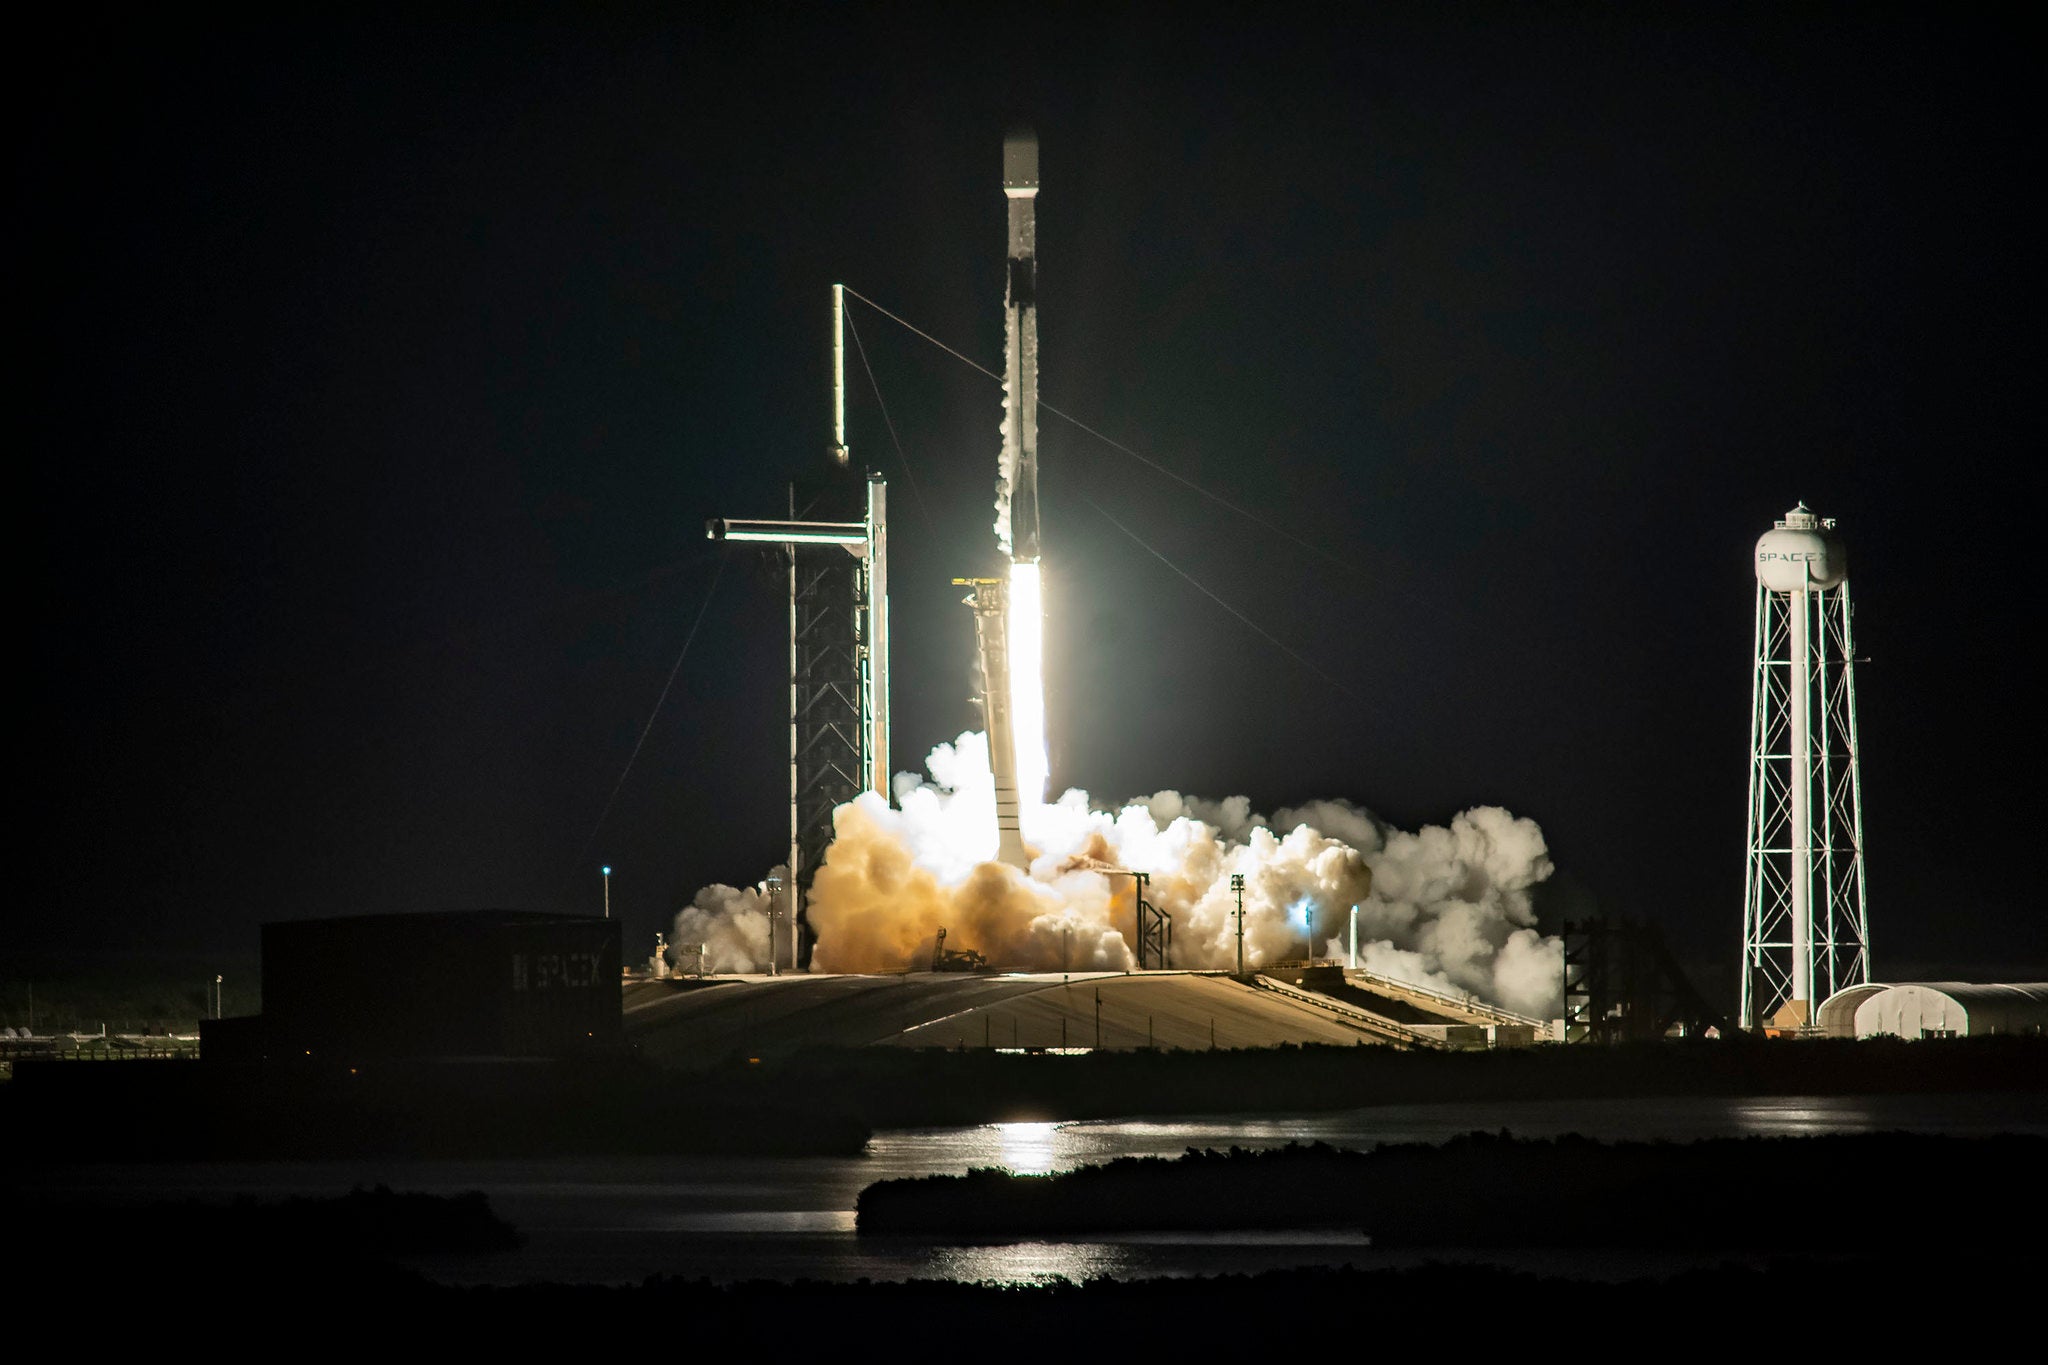 SpaceX will launch a classified payload for the U.S. National Reconnaissance Office